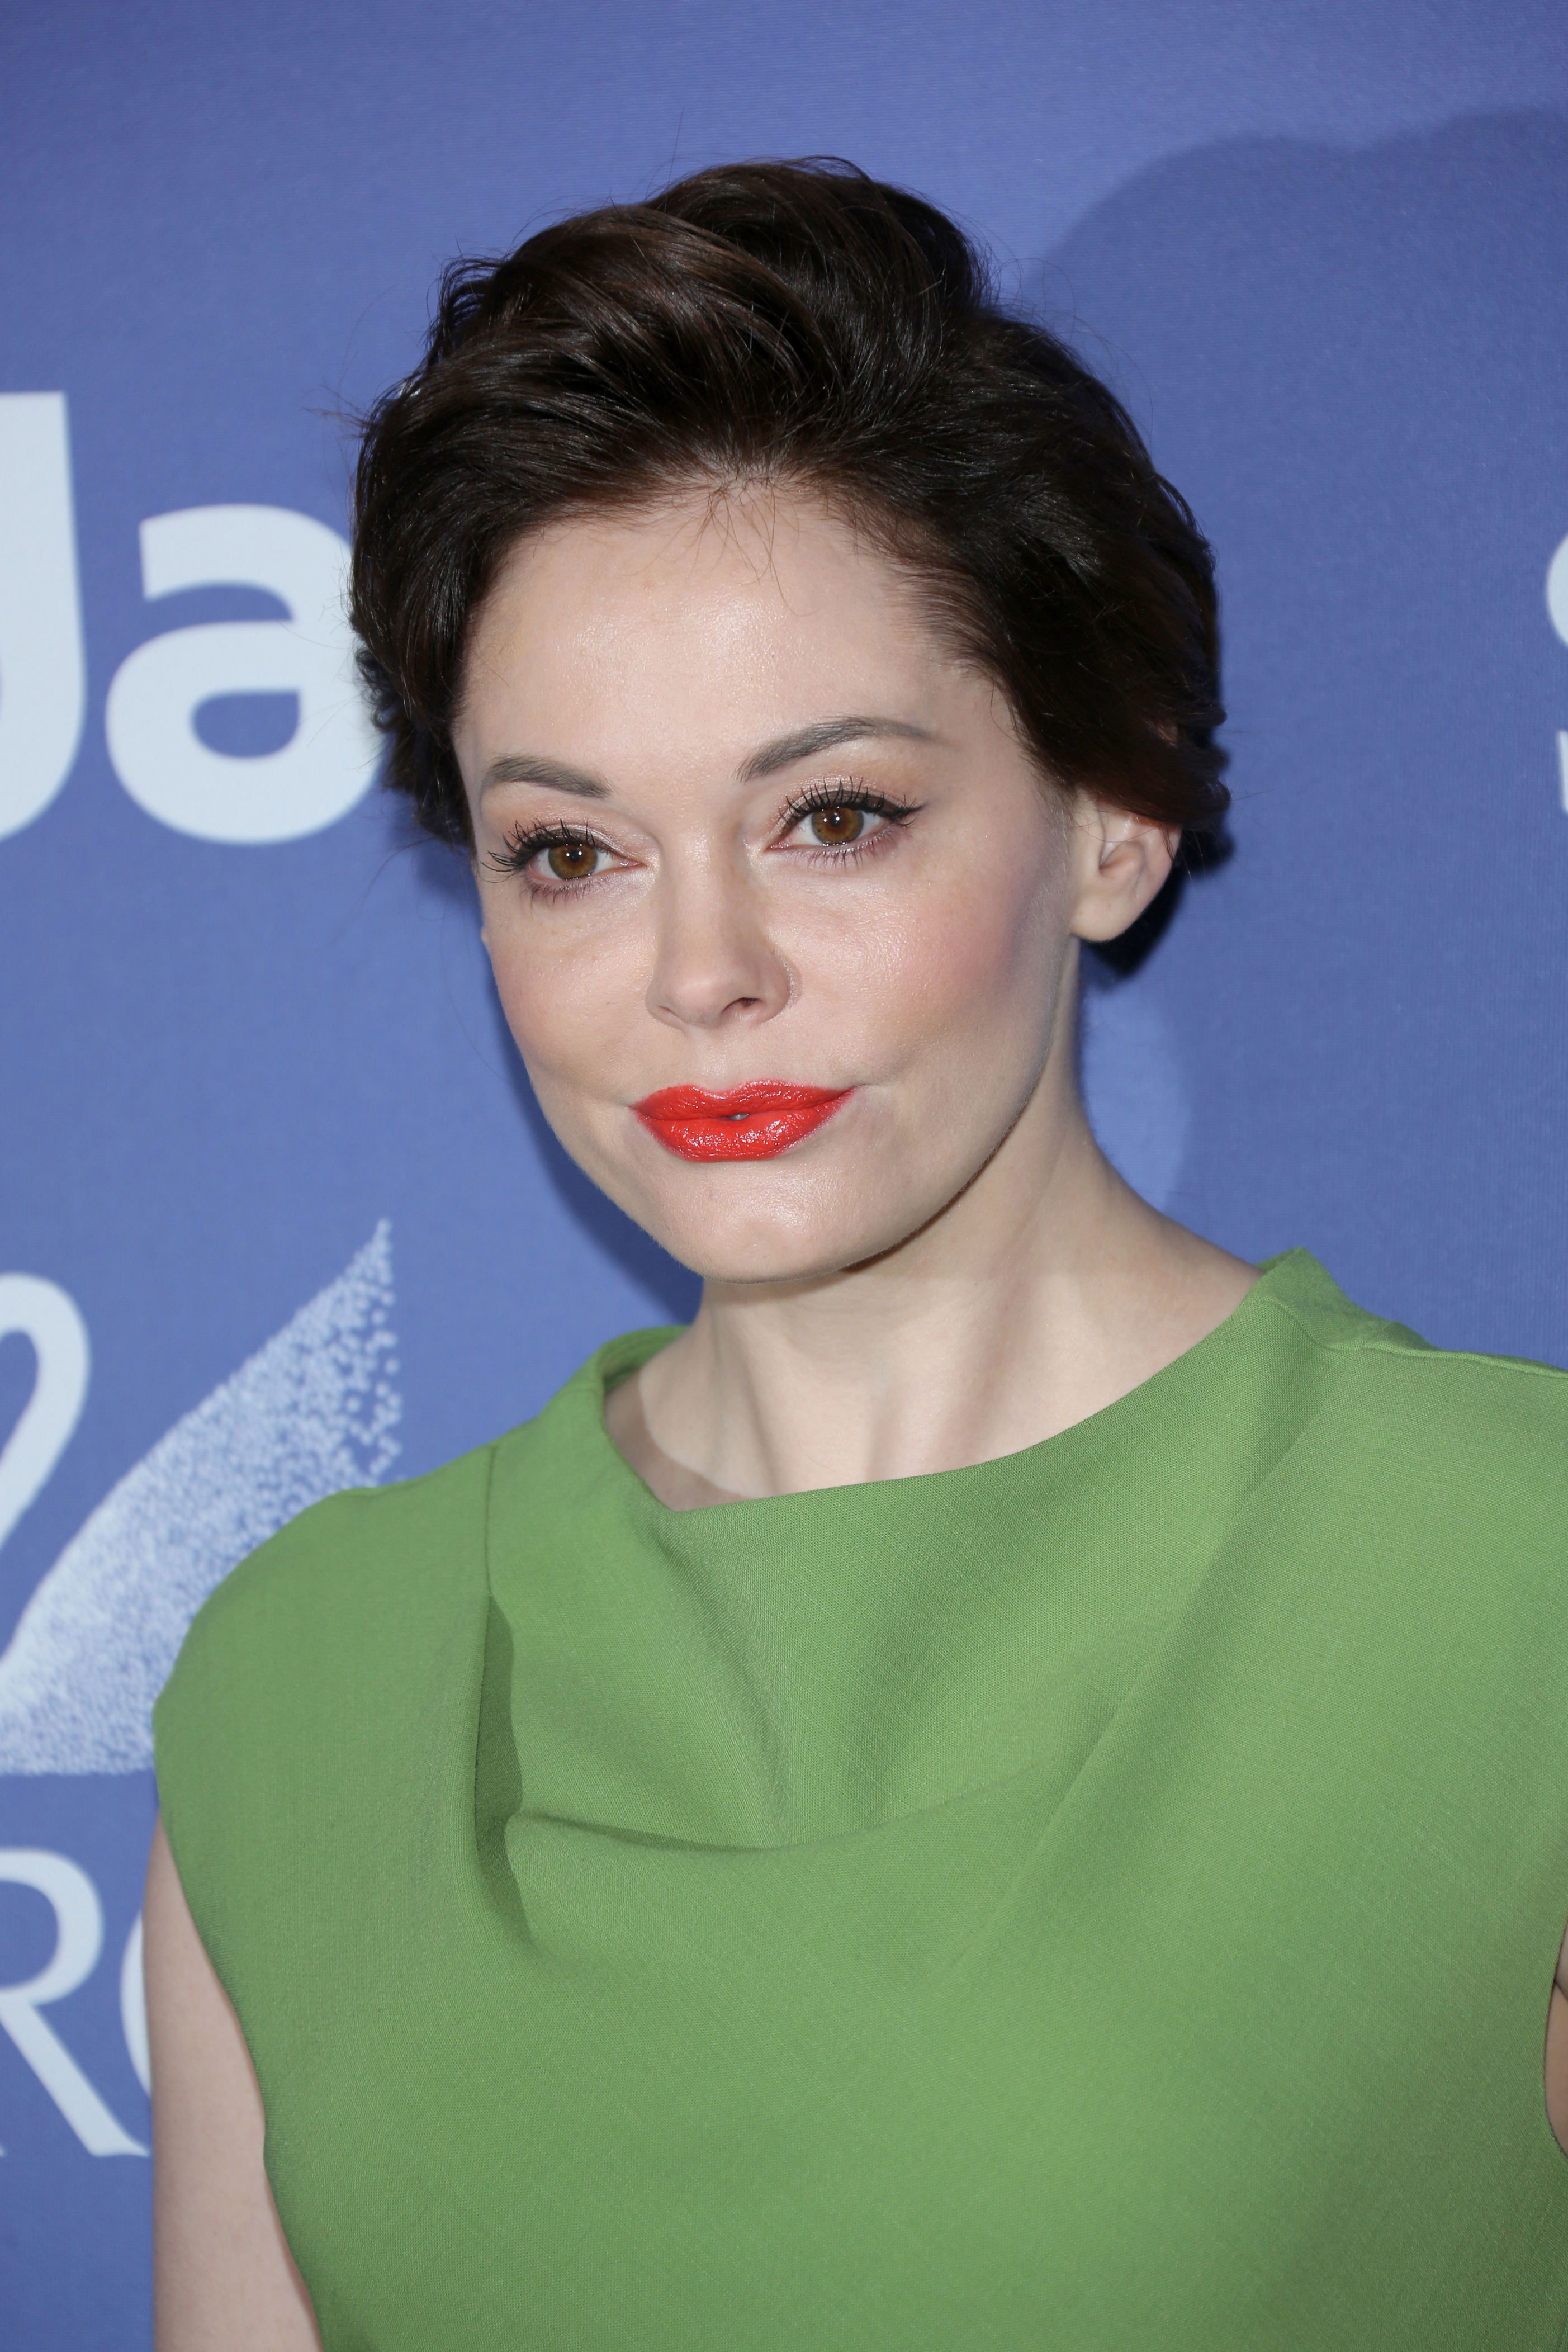 <p>In 2007, Rose McGowan claimed she was a passenger in a car that was involved in a traffic accident that caused her sunglasses to slice a flap of skin under her eye. She said at the time that the injury was so severe, she got a little nip and tuck on her face to prevent scarring. In her 2018 memoir, however, the actress-activist (pictured in 2013) revealed the truth: According to an <a href="https://ew.com/books/2018/01/30/rose-mcgowan-plastic-surgery-book/">Entertainment Weekly</a> report, she writes that during a medical procedure to correct an issue with her sinuses, the surgeon accidentally punctured the skin below her right eye. She was allegedly forced to undergo reconstructive surgery, which left her eye looking "slightly pinched." She then underwent surgery on the other eye to even things out. As for the lie, she claims her publicists advised her to make up the story about the car accident. </p>